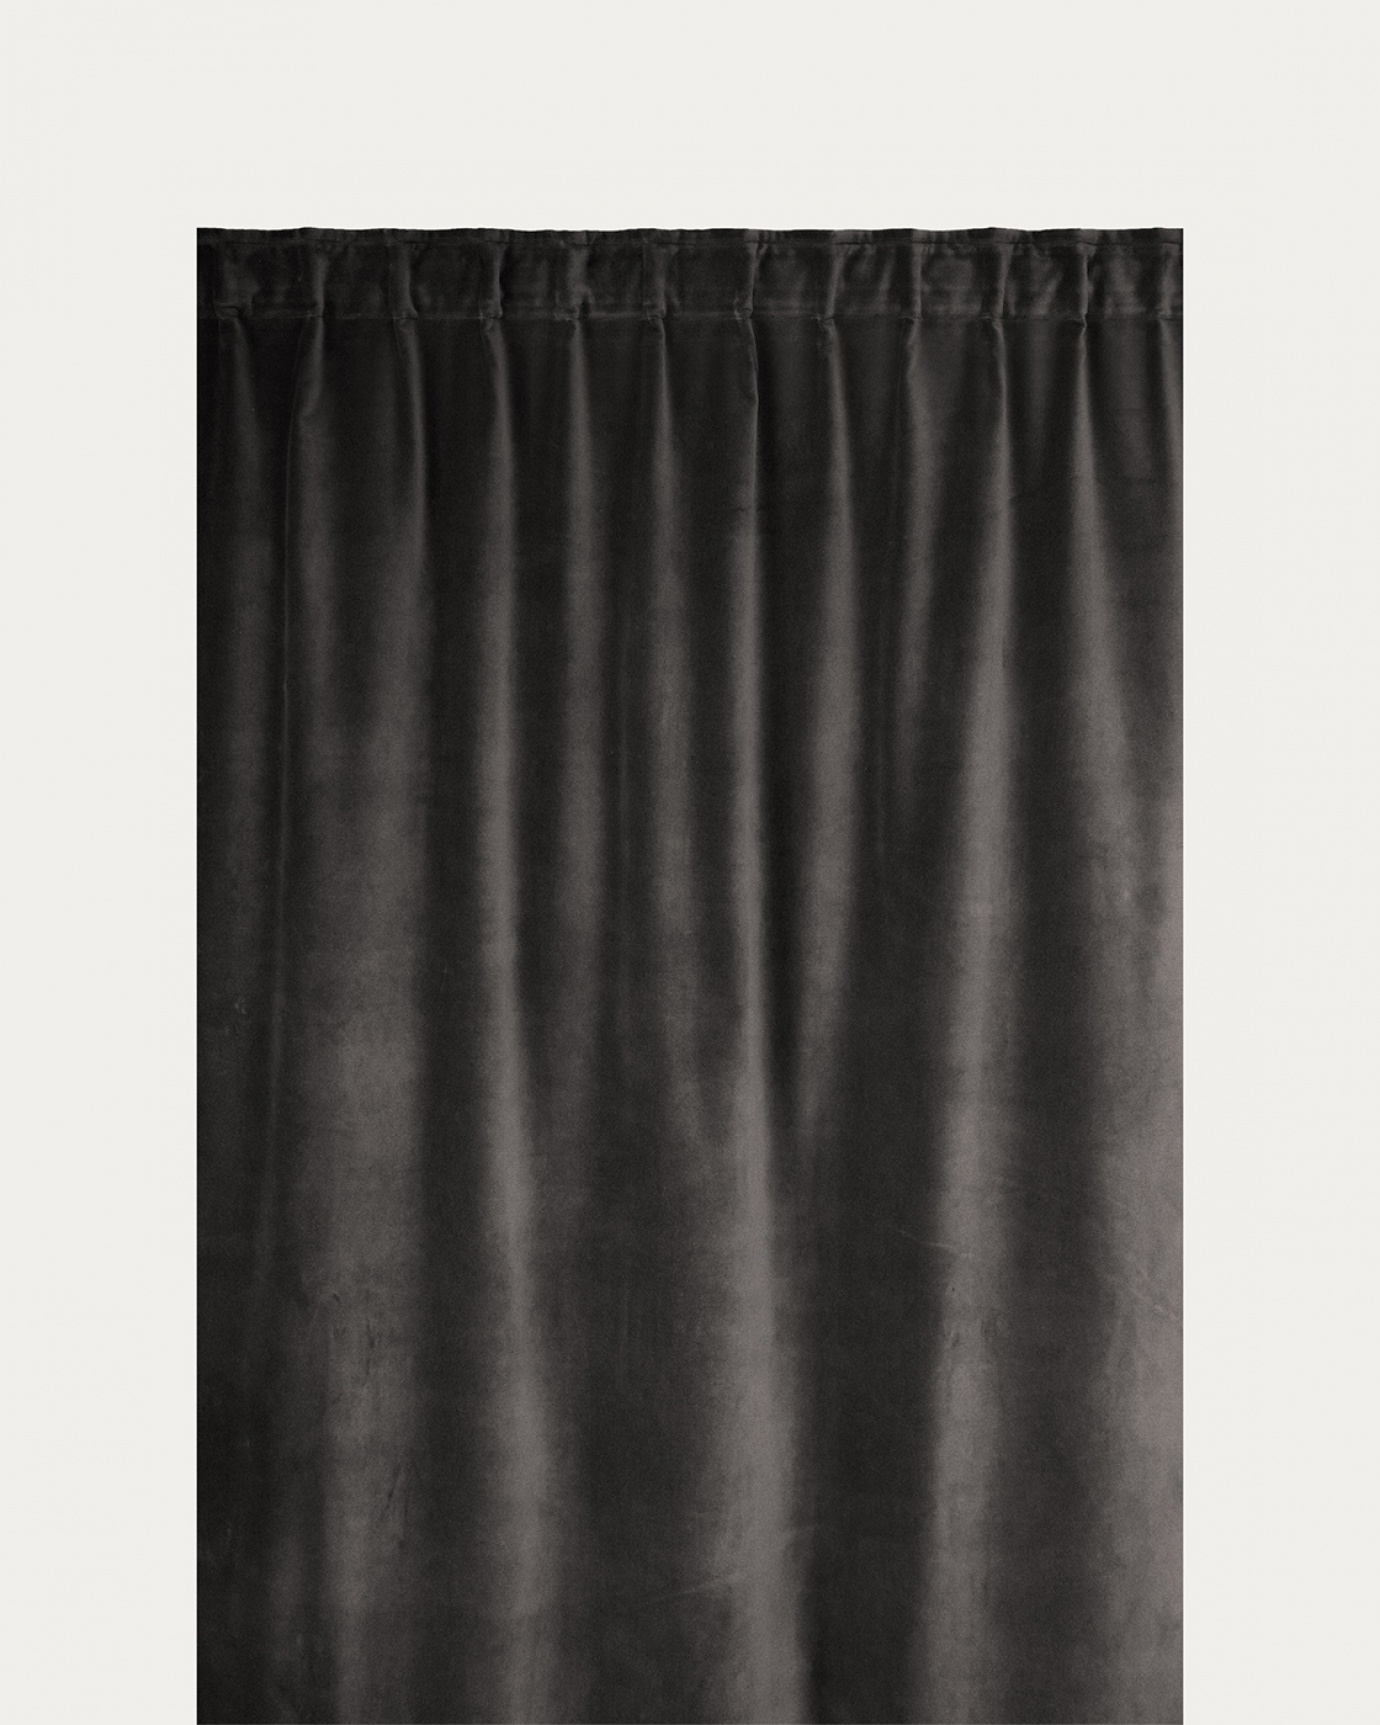 Product image dark charcoal grey PAOLO curtain made of cotton velvet with finished pleat tape from LINUM DESIGN. Size 135x290 cm and sold in 2-pack.